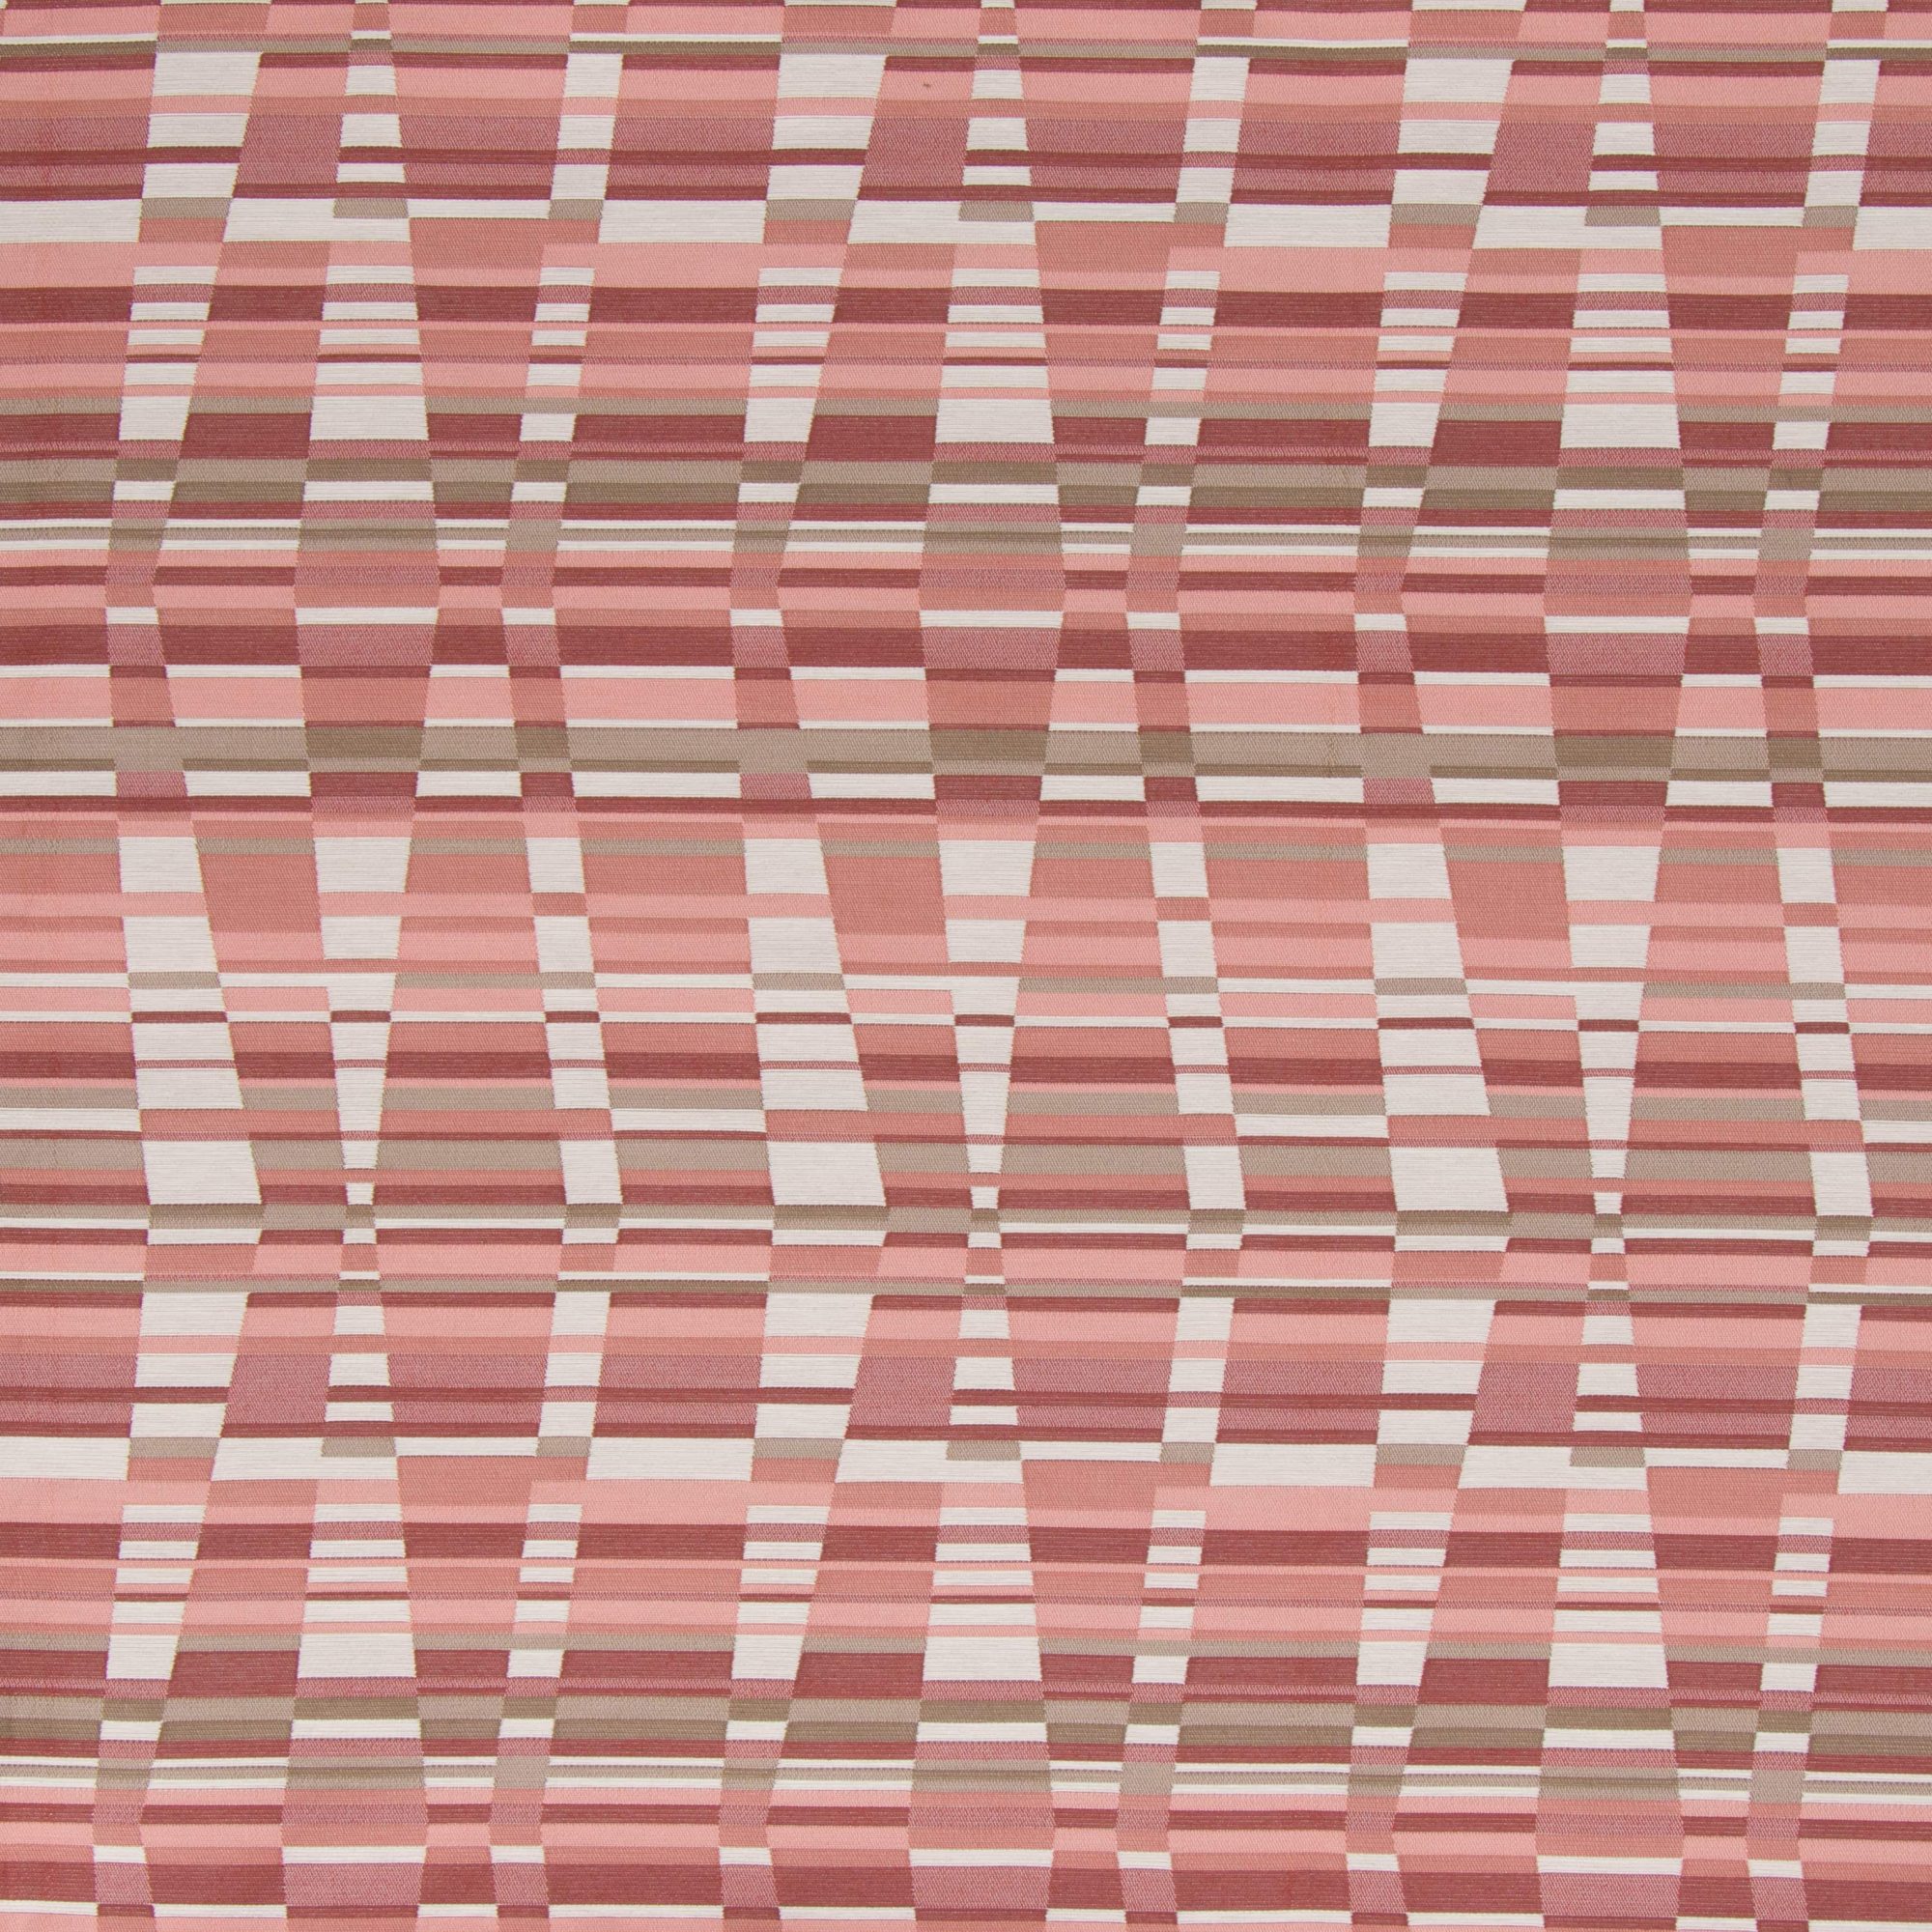 Bella Dura and Bella Dura Home cut yardage fabric in the pattern Thirasia and color Coral.